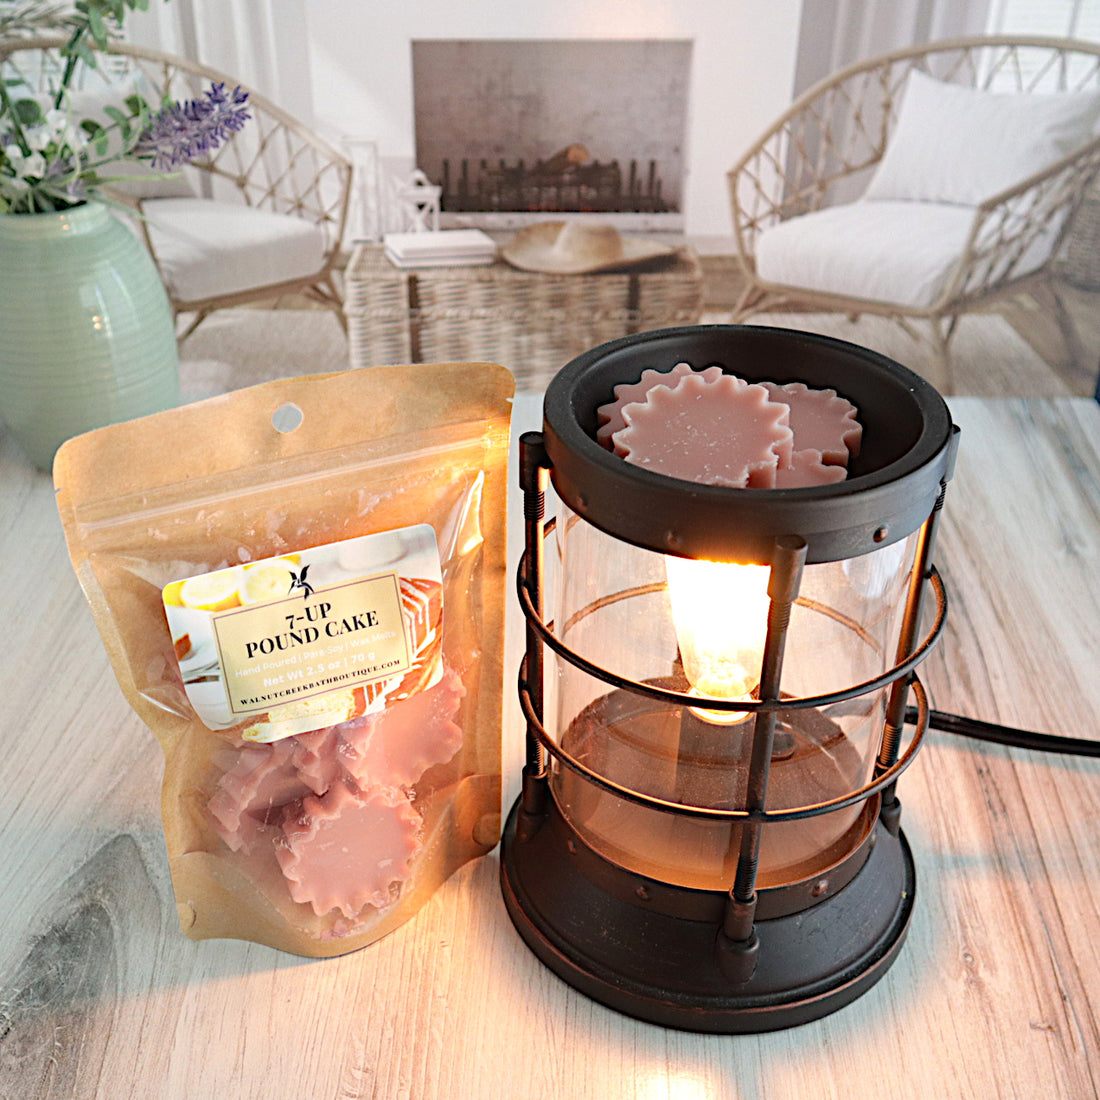 7 up pound cake wax melts are in a bag standing next to a lit burner. the burner has some of the starburst shaped wax melts in it getting ready to be melted. this is all sitting on a washed out wooden base with a couple of chairs in the background next to a fireplace